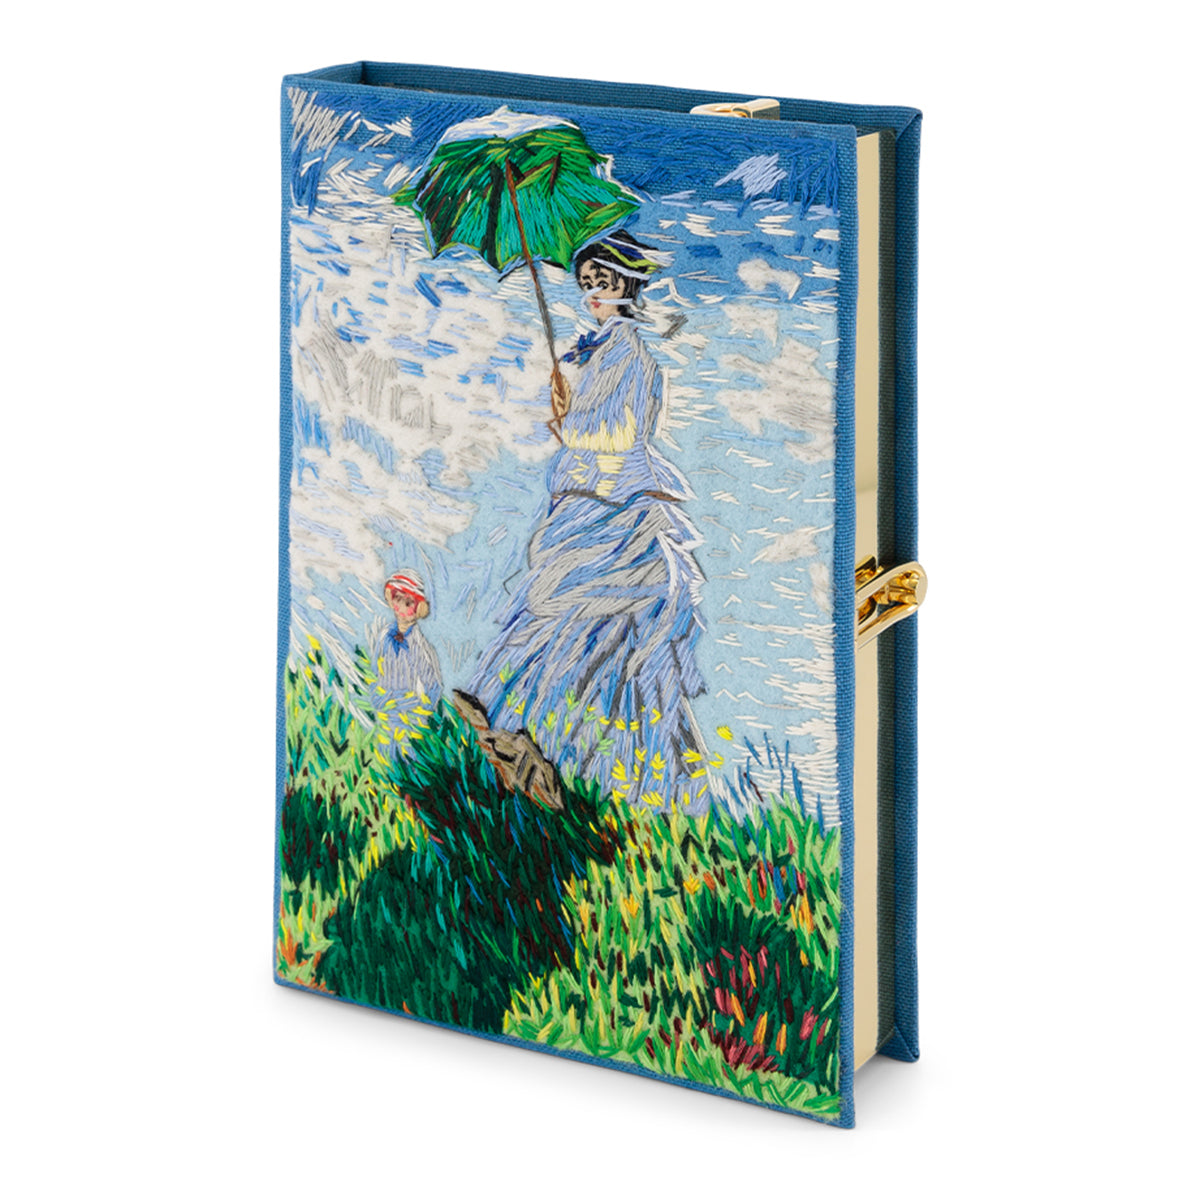 Monet "Femme A L'ombrelle" Book Clutch with Strap - Olympia Le-Tan